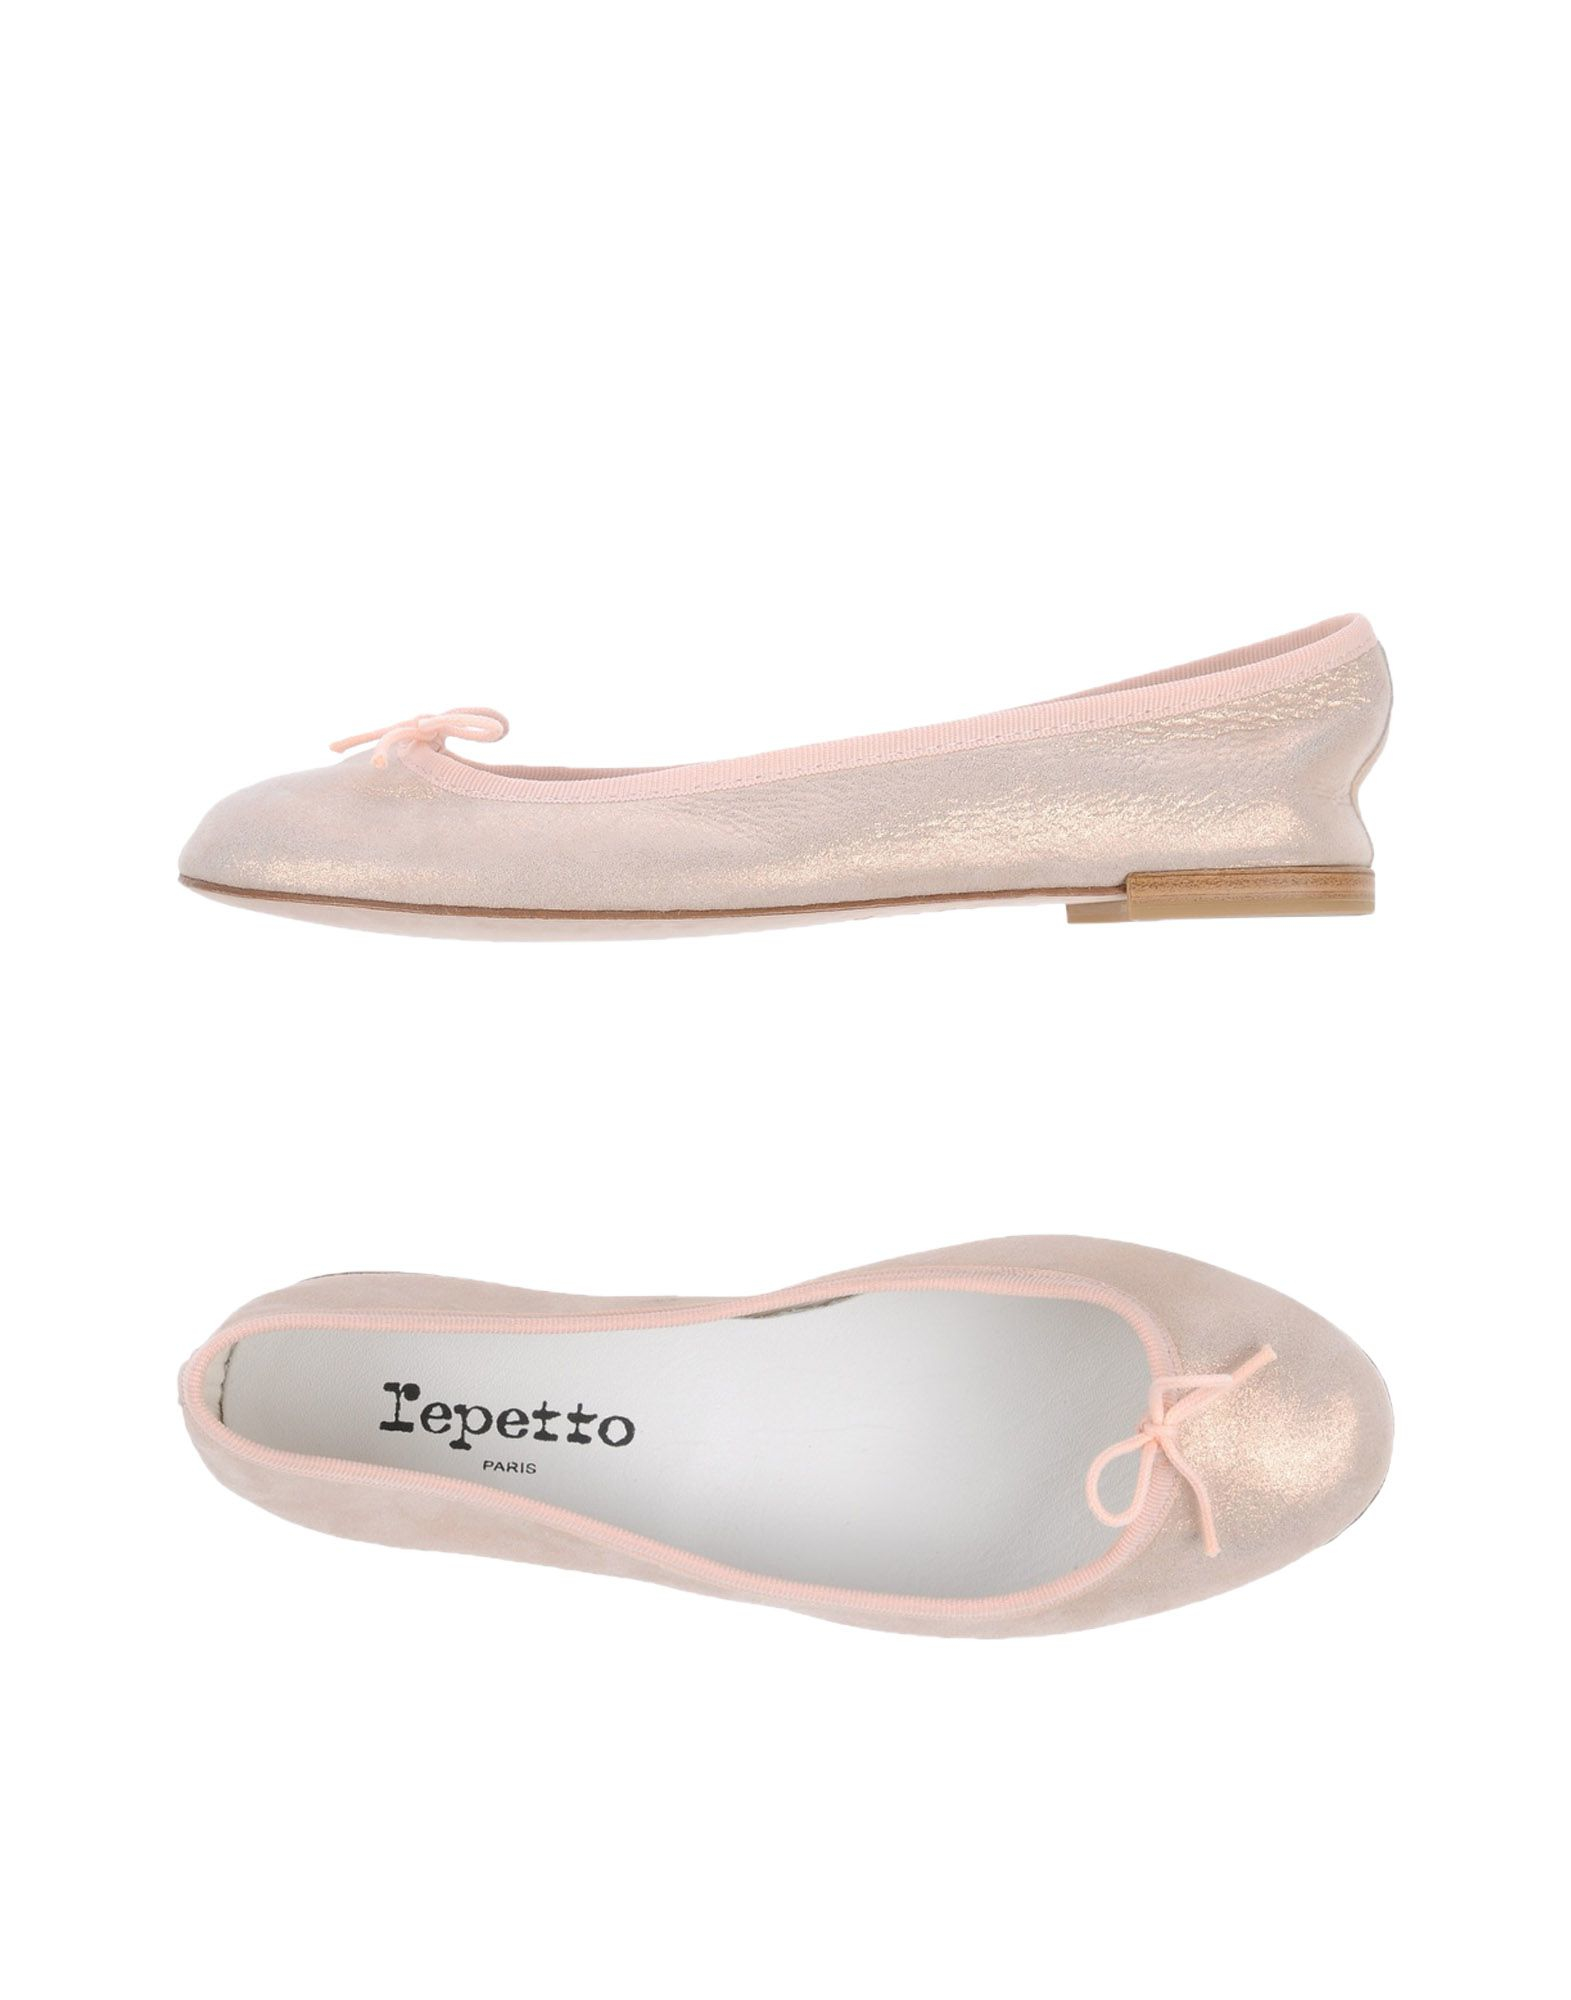 Repetto Leather Ballet Flats in Light 